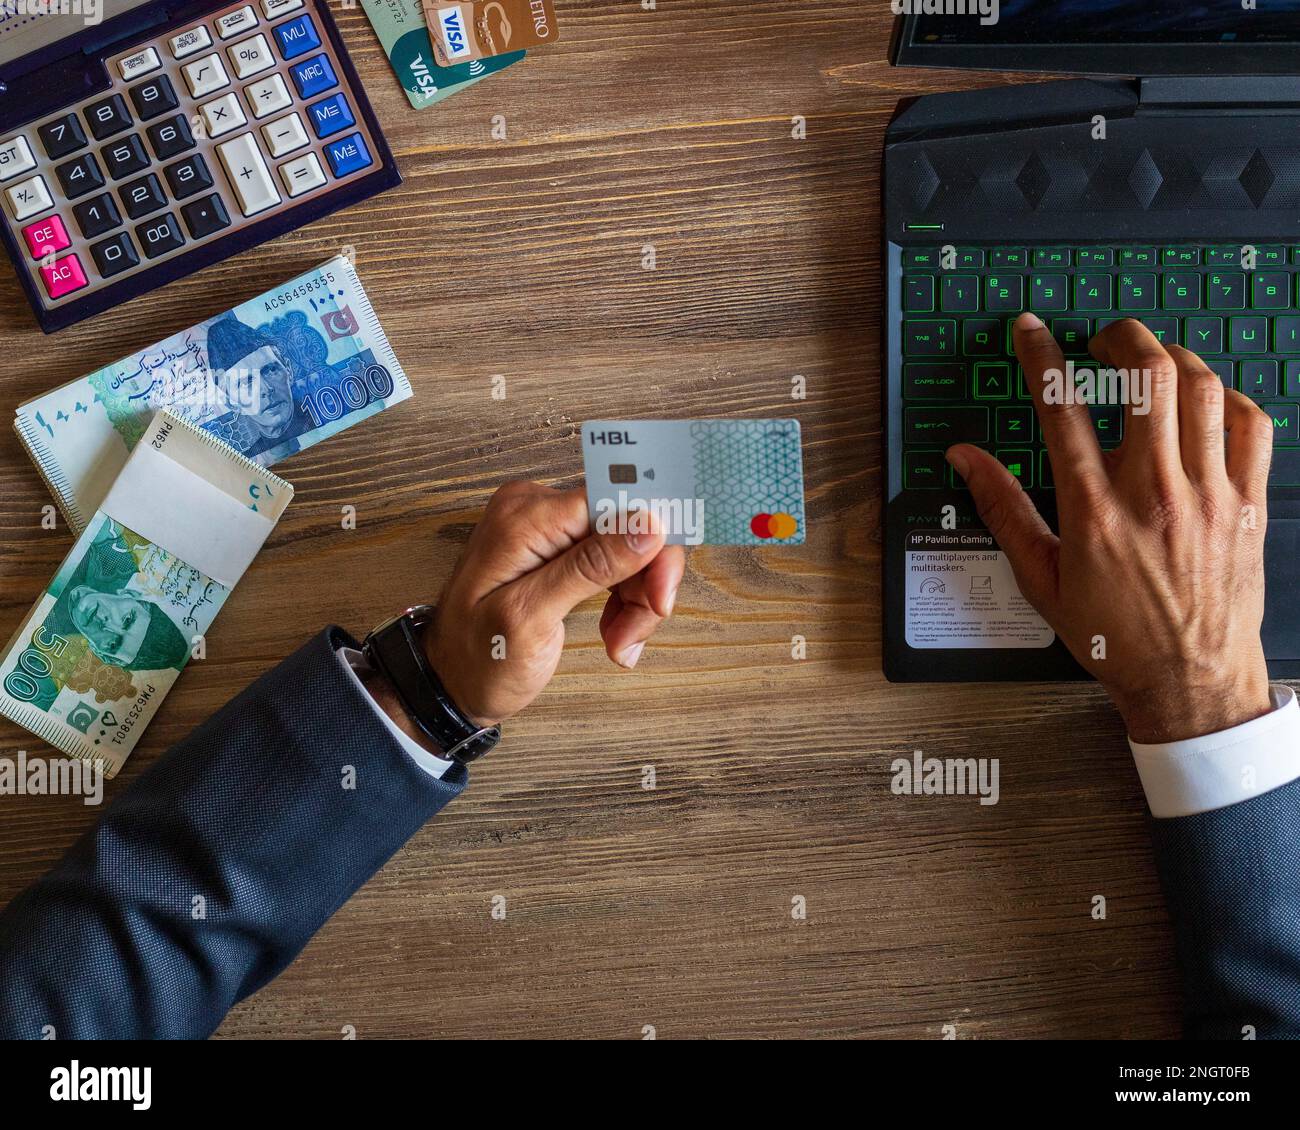 Business man using HBL bank debit card for online/ e-commerce transaction on his laptop, stack of Pakistani currency notes and calculator on table Stock Photo